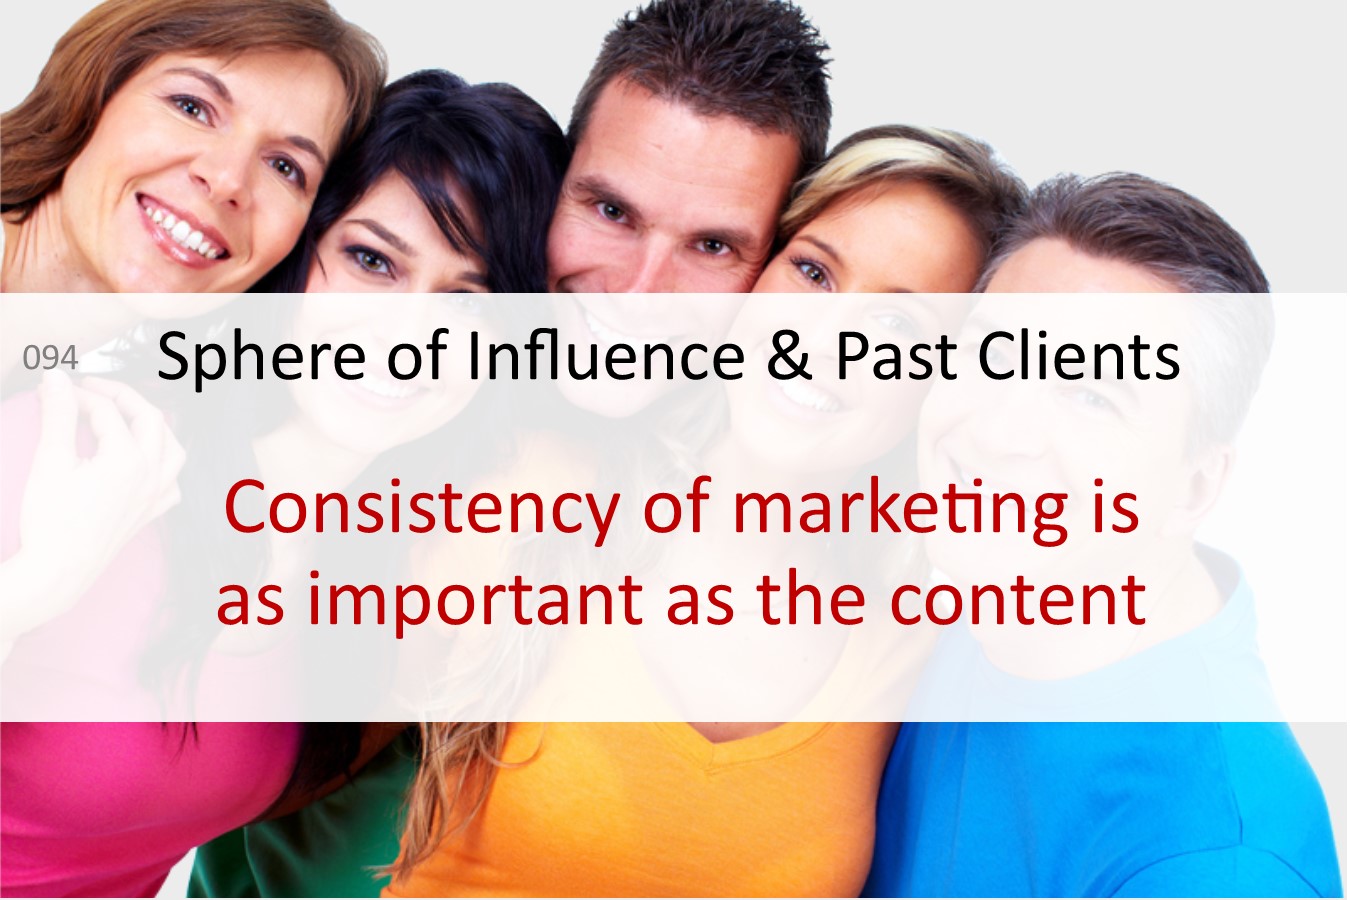 sphere of influence past clients referrals